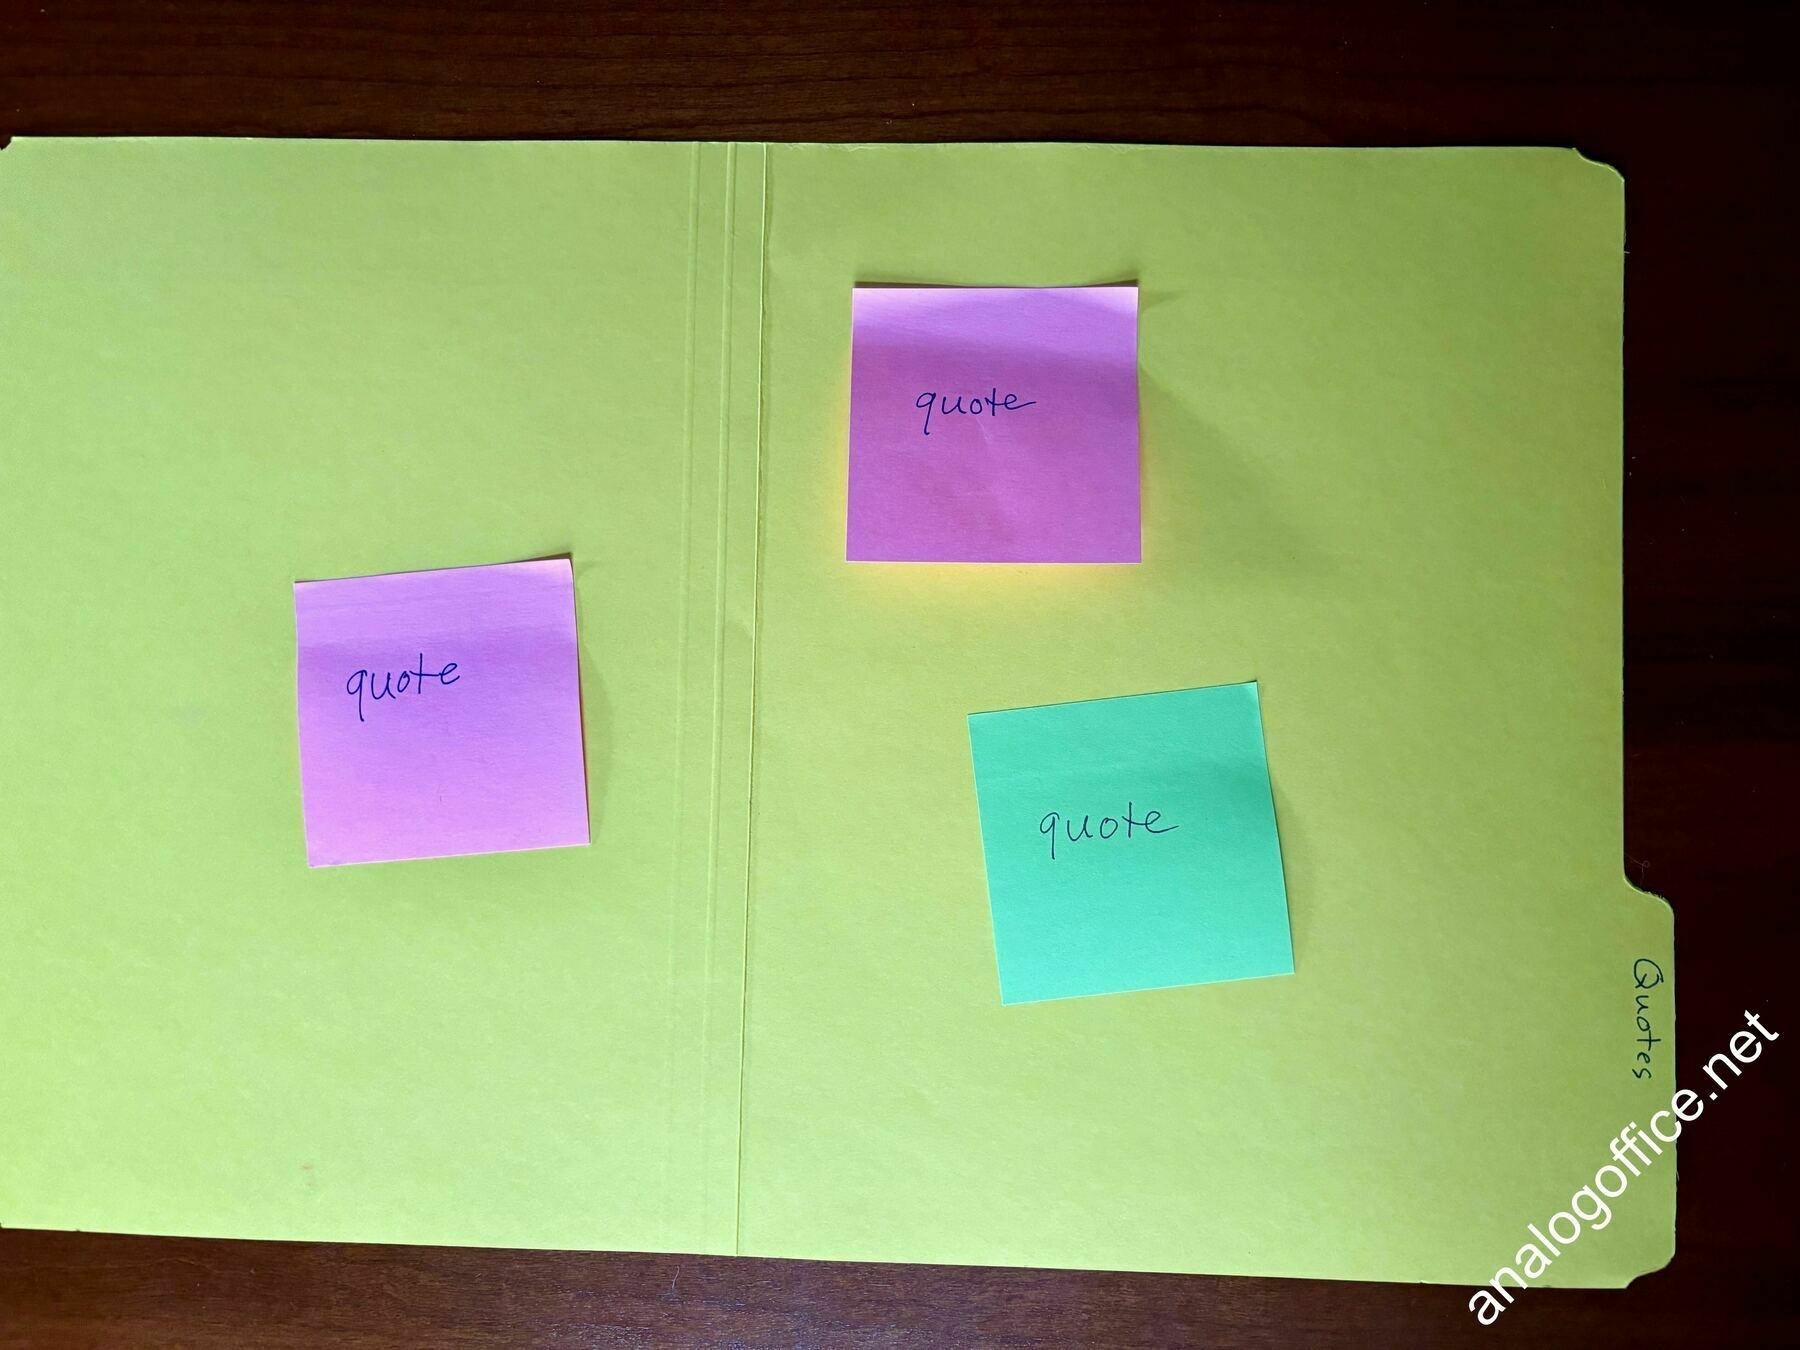 post-it notes in a folder labeled 'quotes'